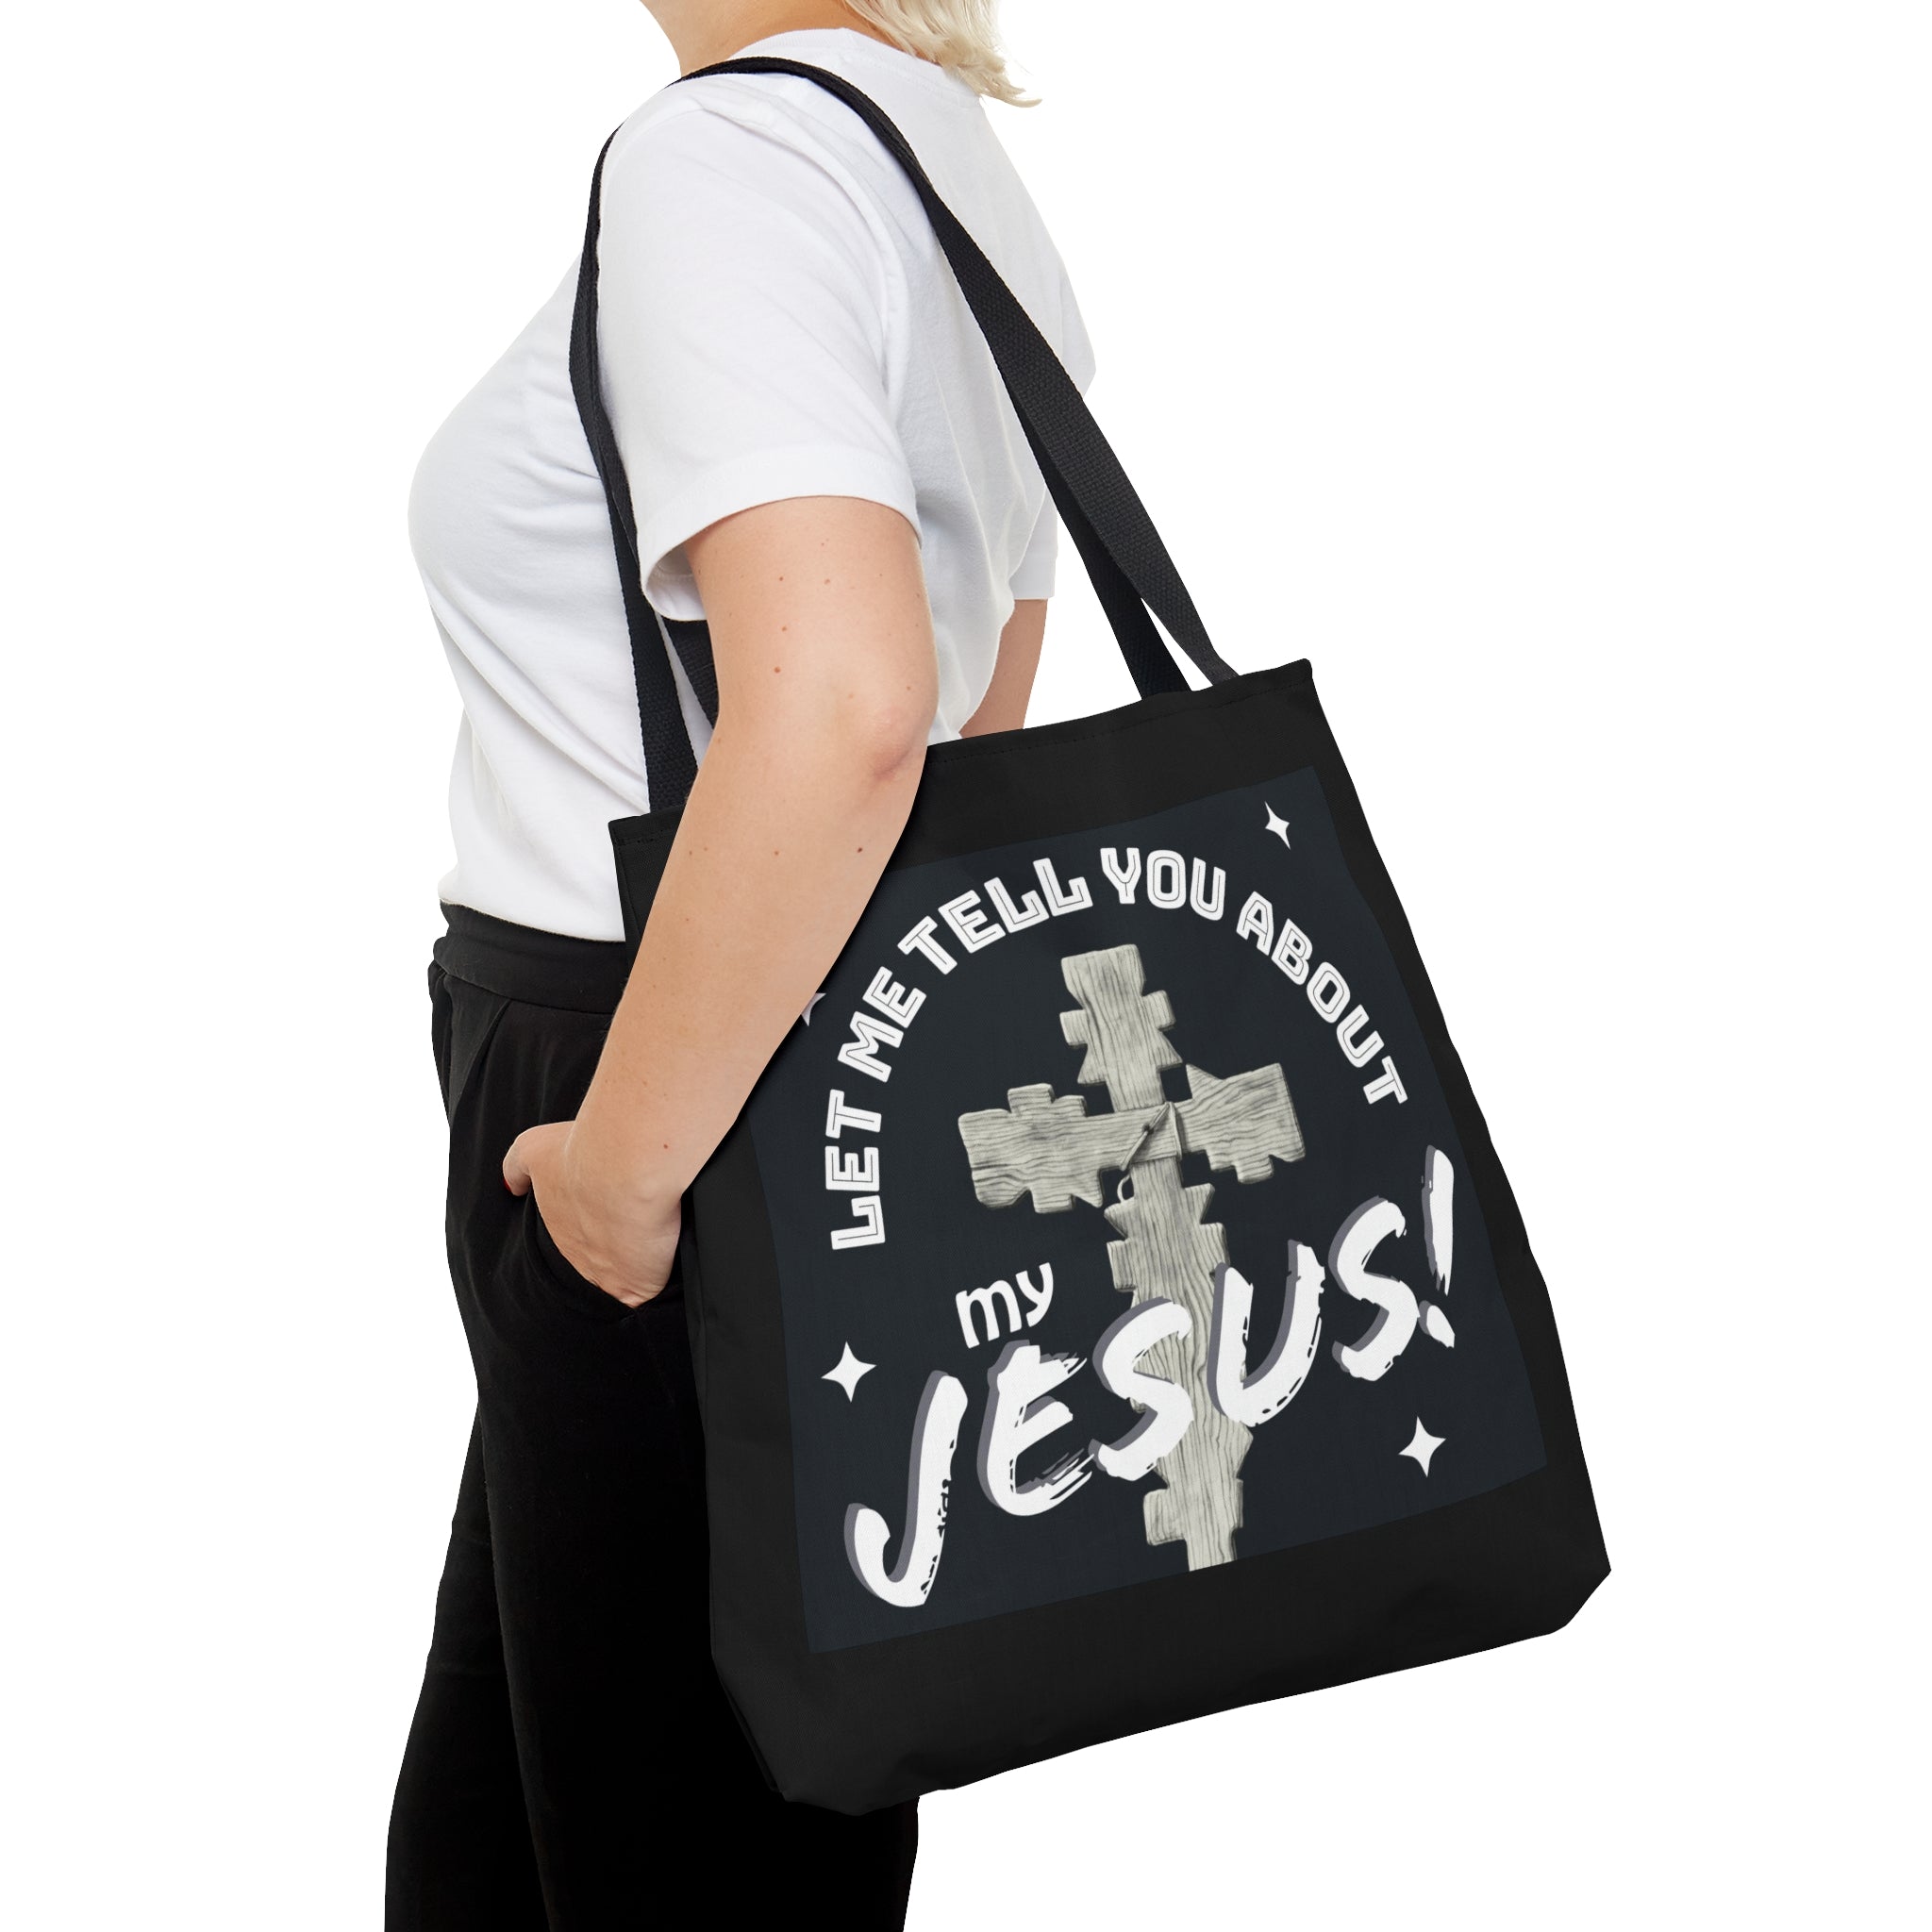 Let Me Tell You About My Jesus! Tote Bag - Shell Design Boutique